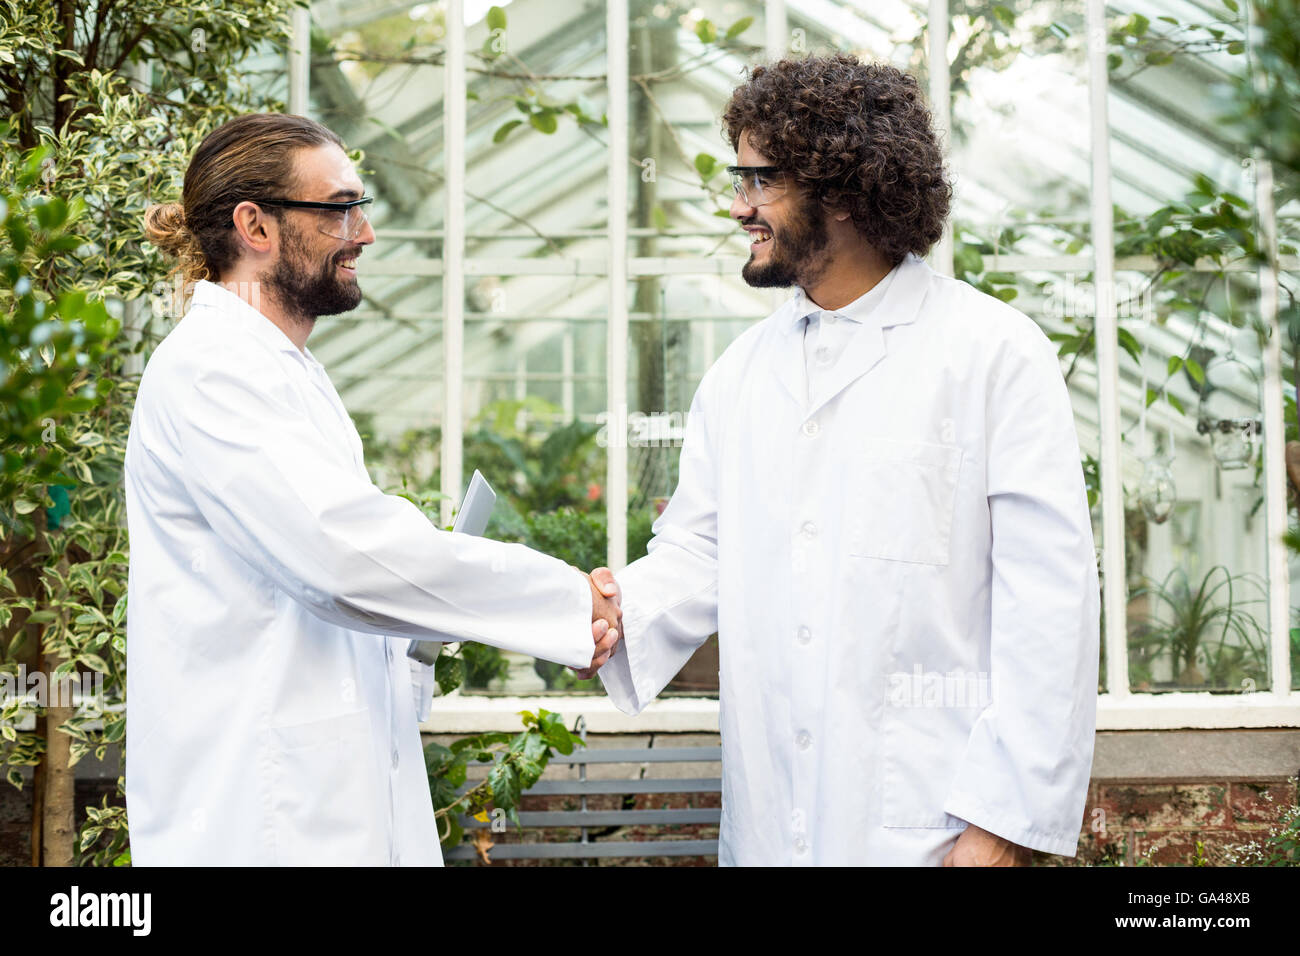 Male scientists handshaking outside greenhouse Stock Photo